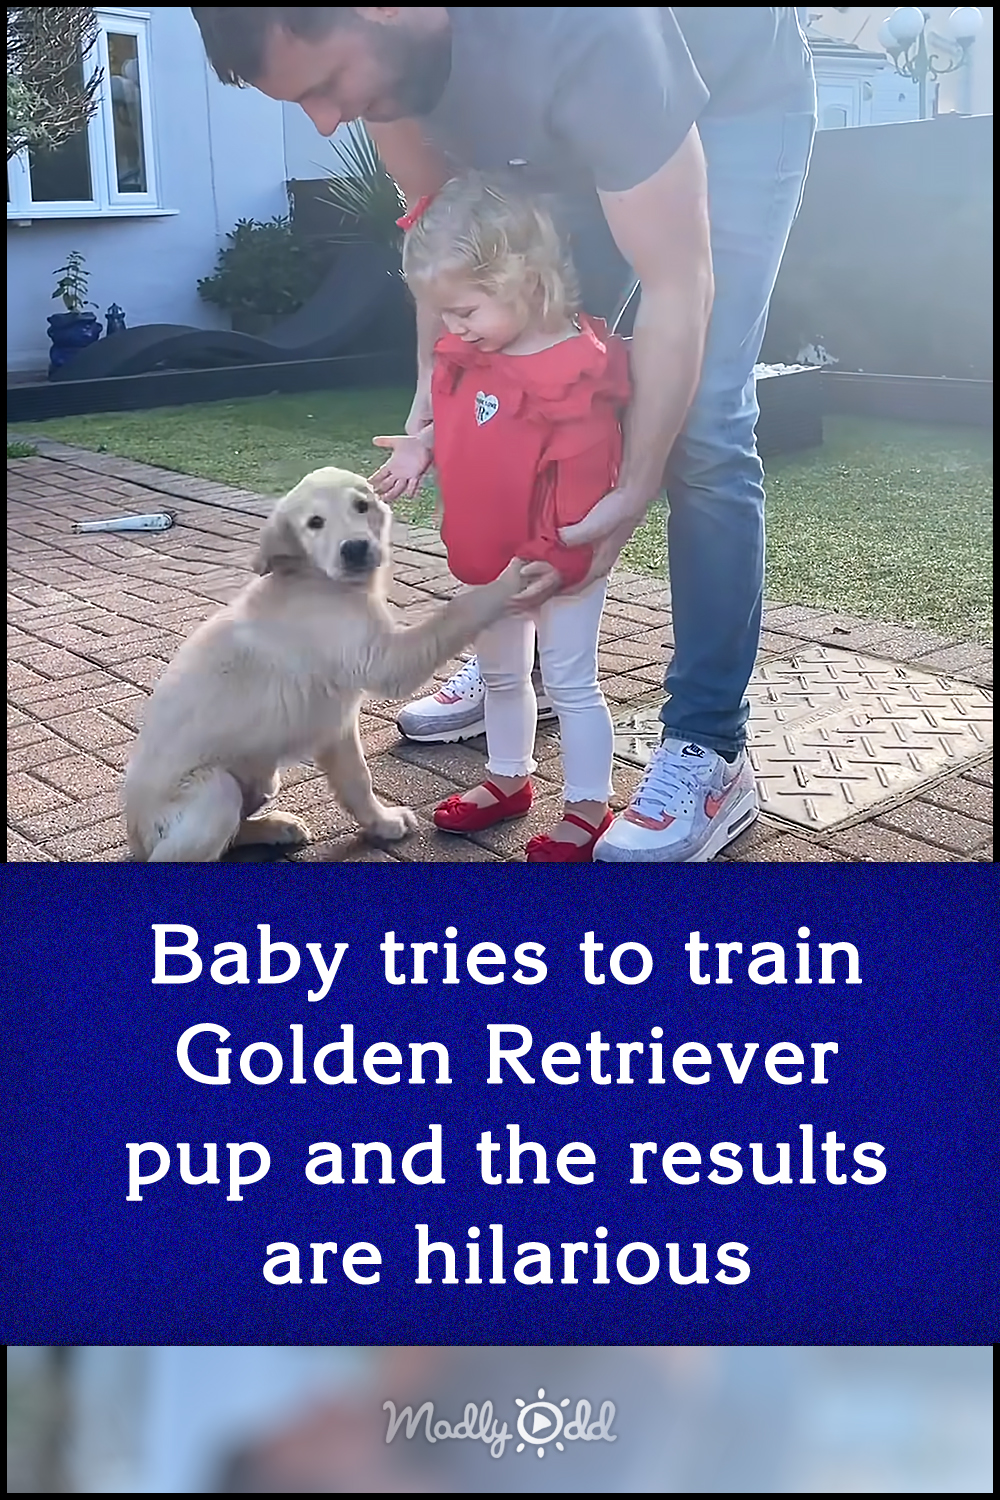 Baby tries to train Golden Retriever pup and the results are hilarious